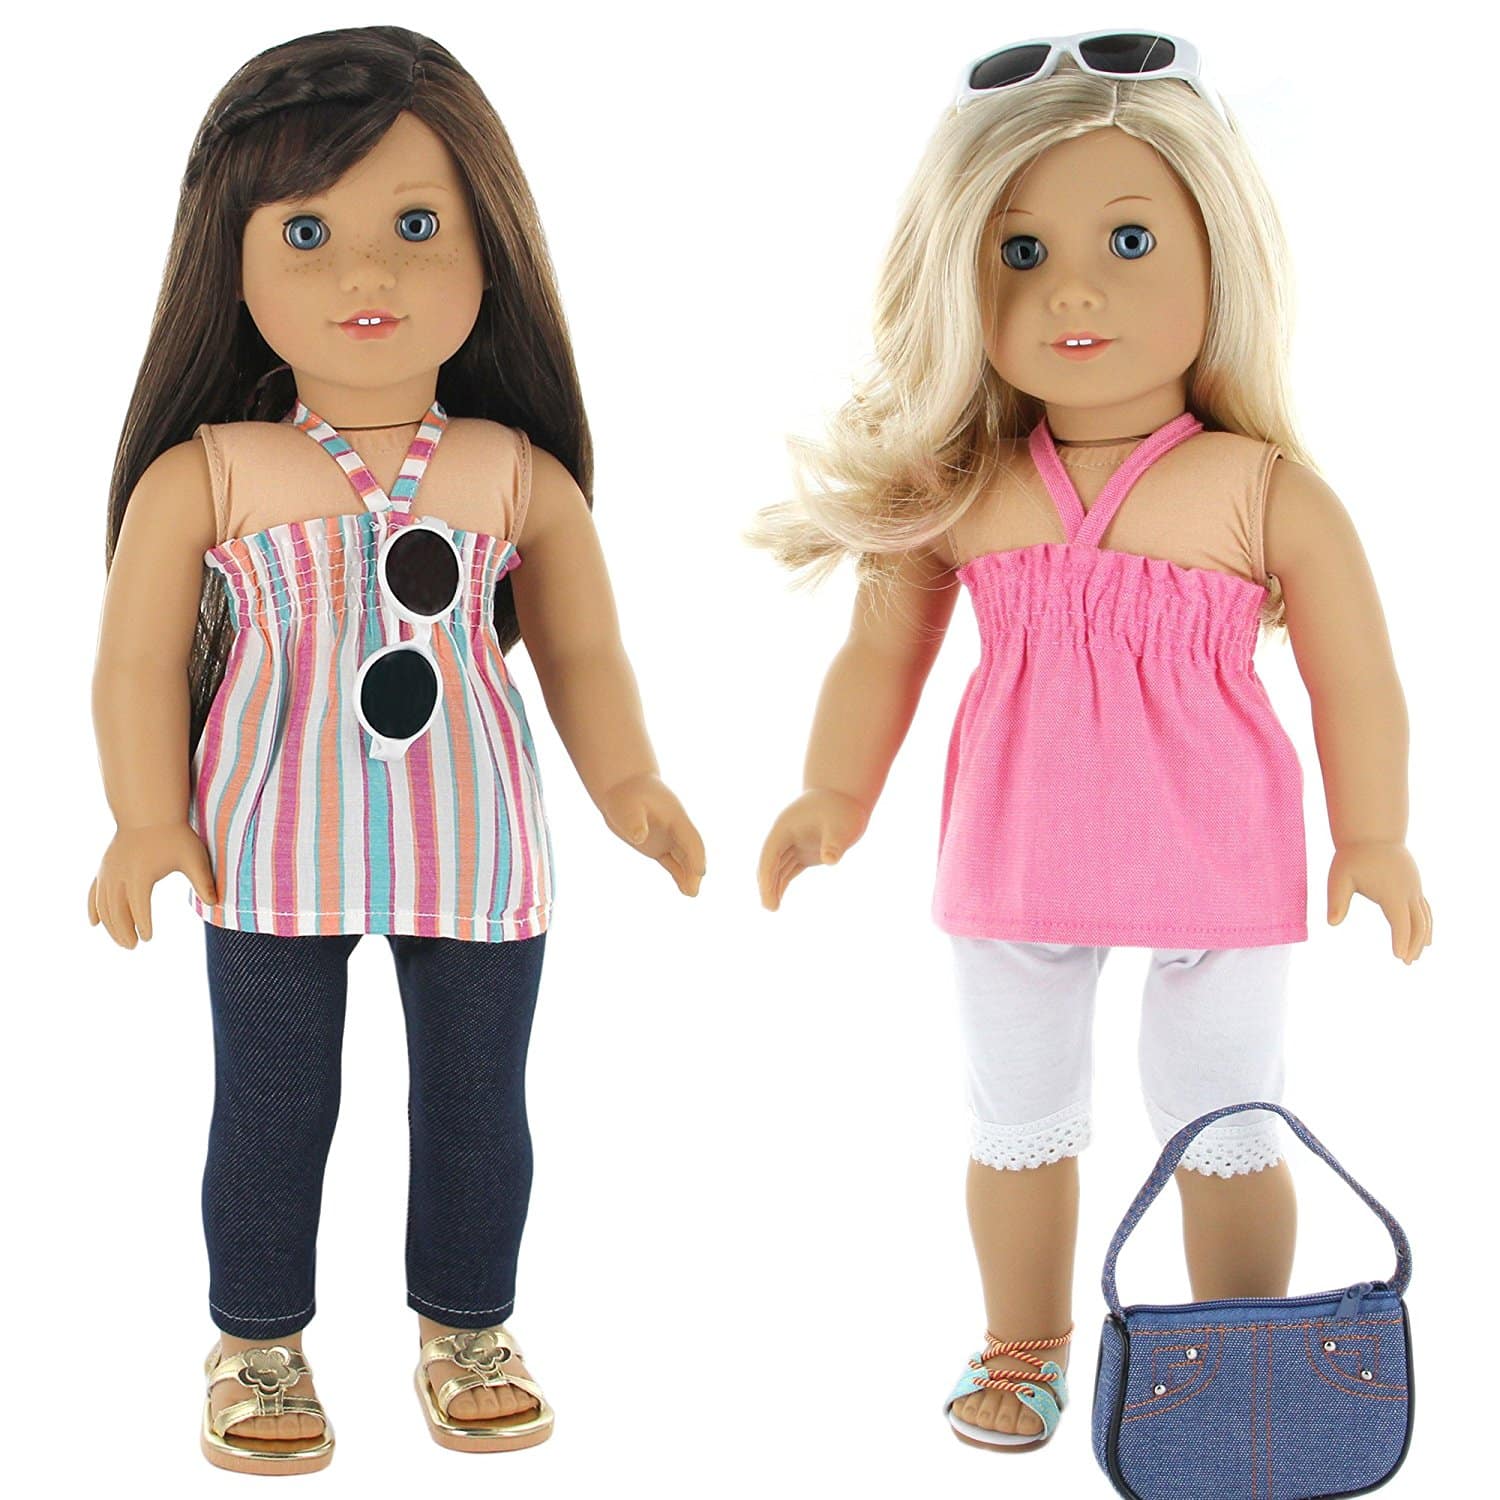 LIGHTNING DEAL ALERT! 7 Pc. Casual Everyday Outfit Set Fits 18 Inch Doll Clothes Includes- X2 Pants, X2 Tops, Headband, Sun Glasses and Pocketbook – 59% off